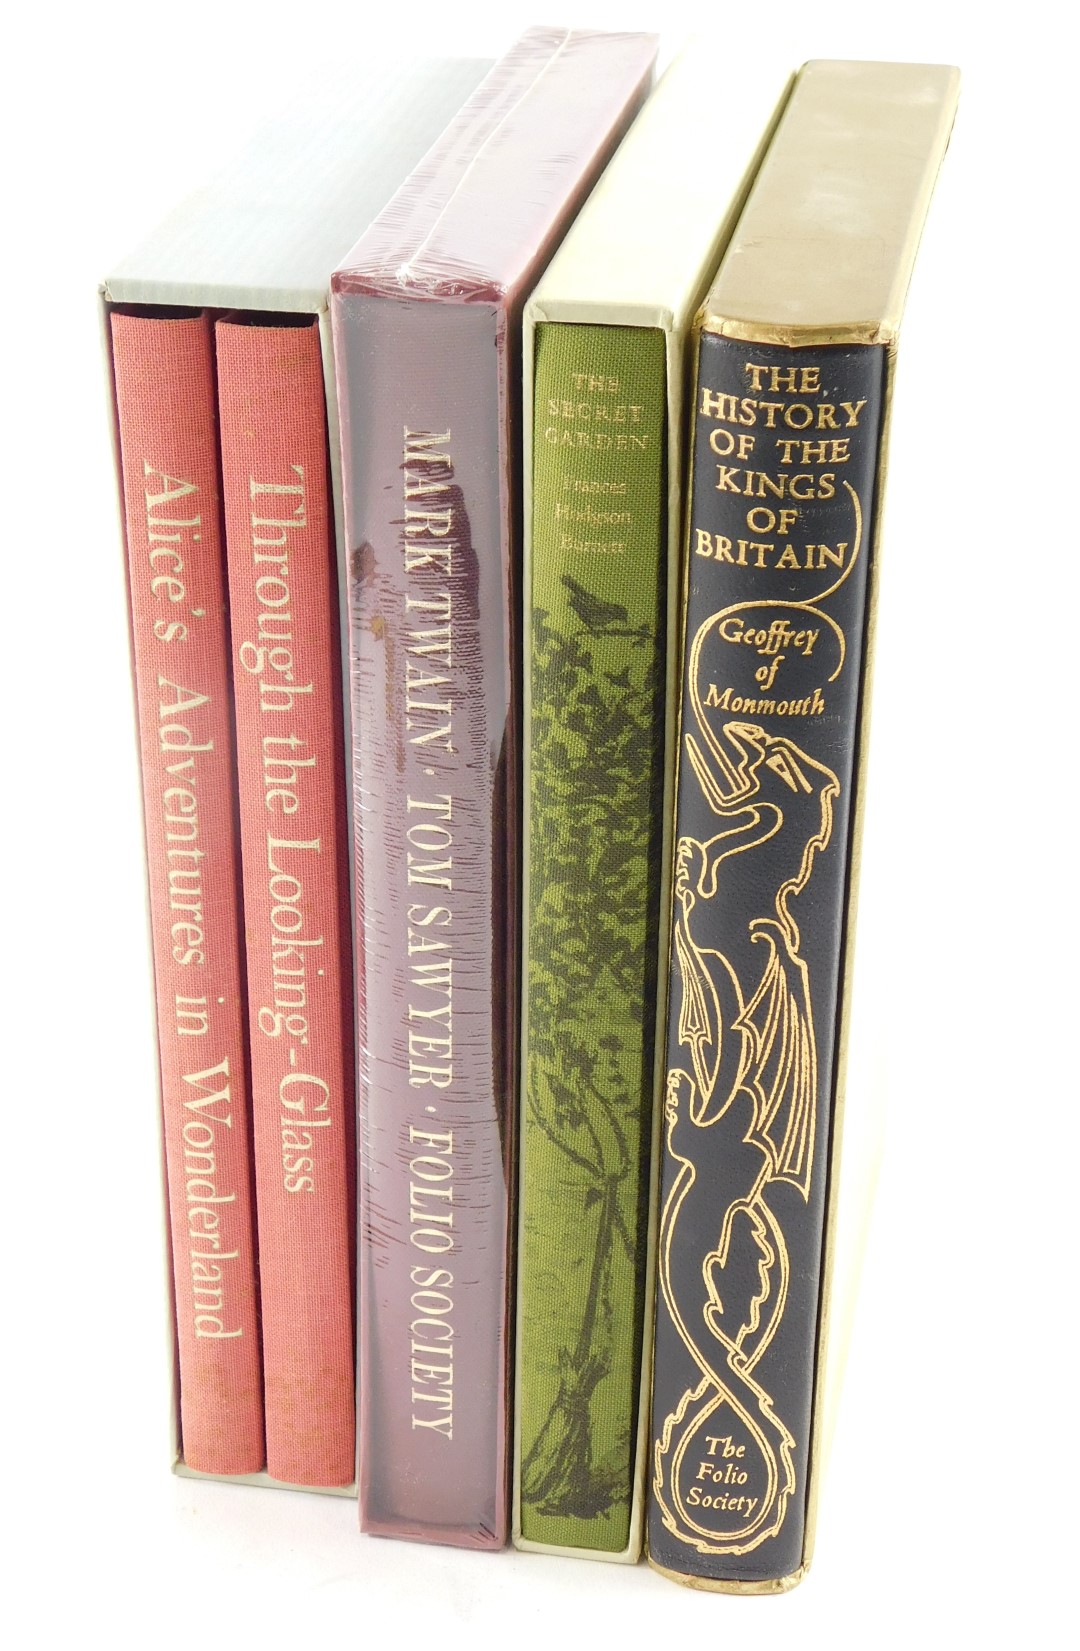 Folio Society publications, Carroll (Lewis) Alice's Adventures in Wonderland and Through the Looking